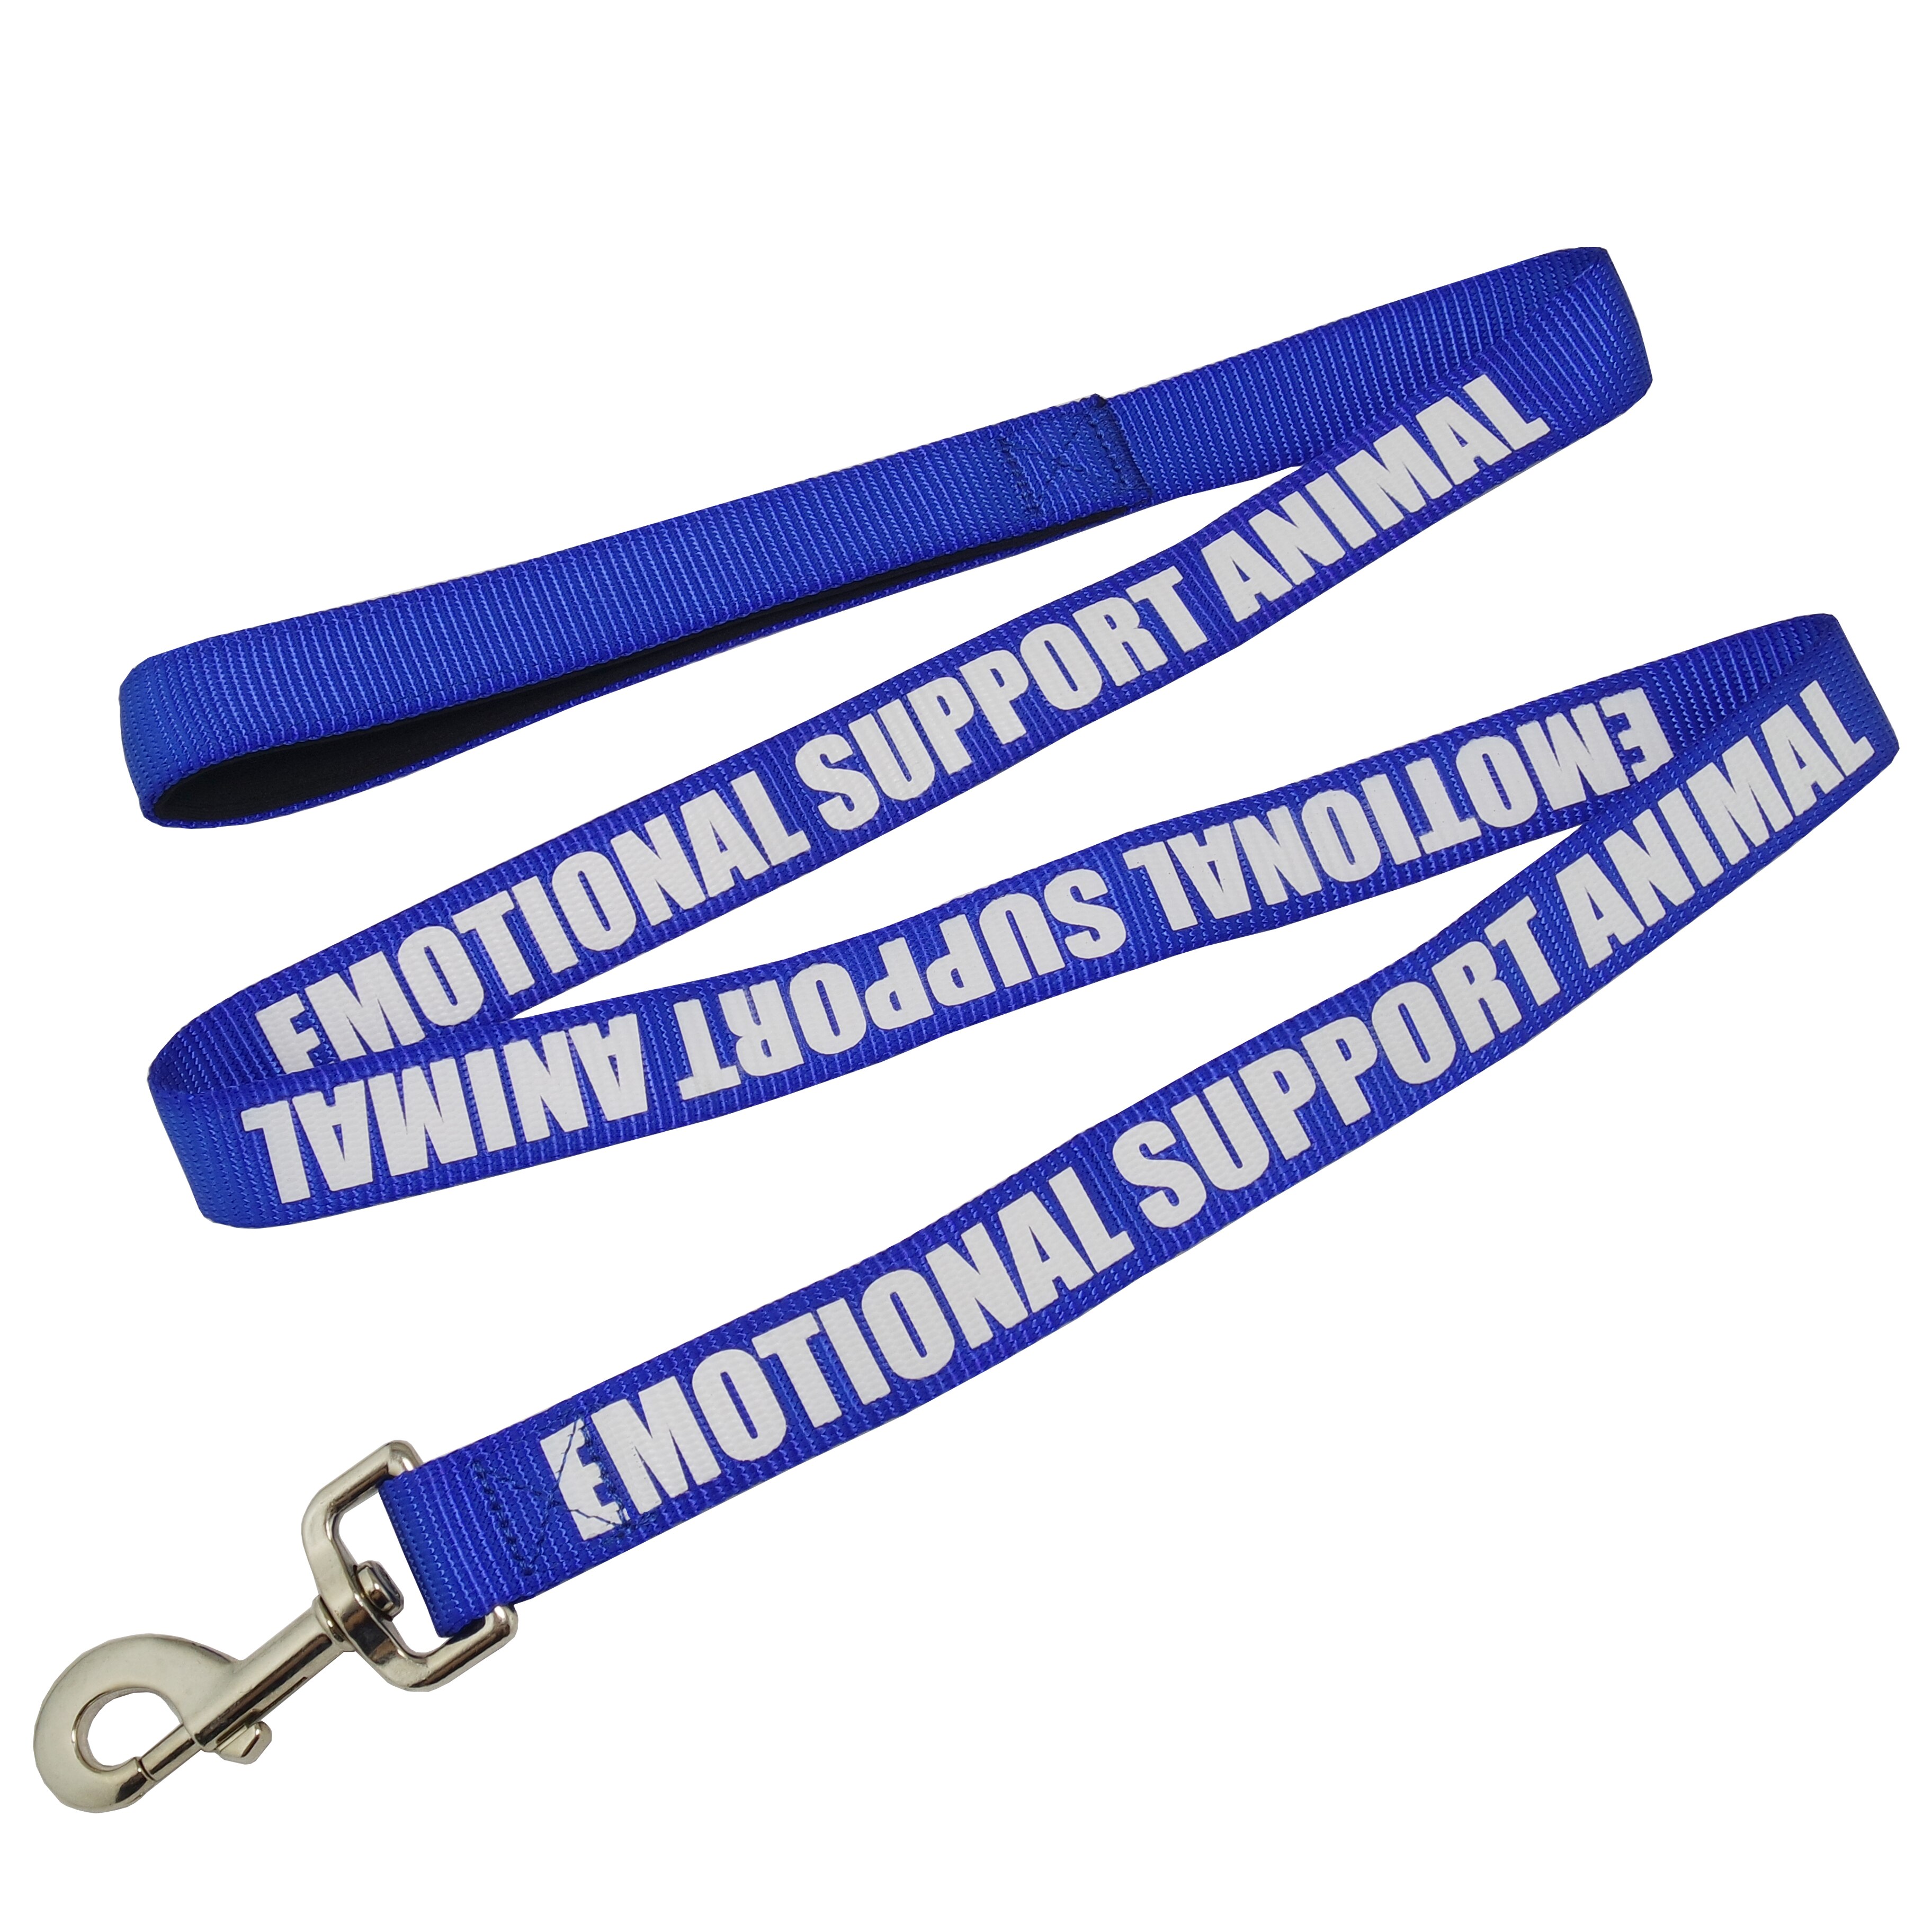 Service Dog Leash Wrap Emotional Support animal leash and Reflective Lettering Supplies or Accessories for Service Dog Vest